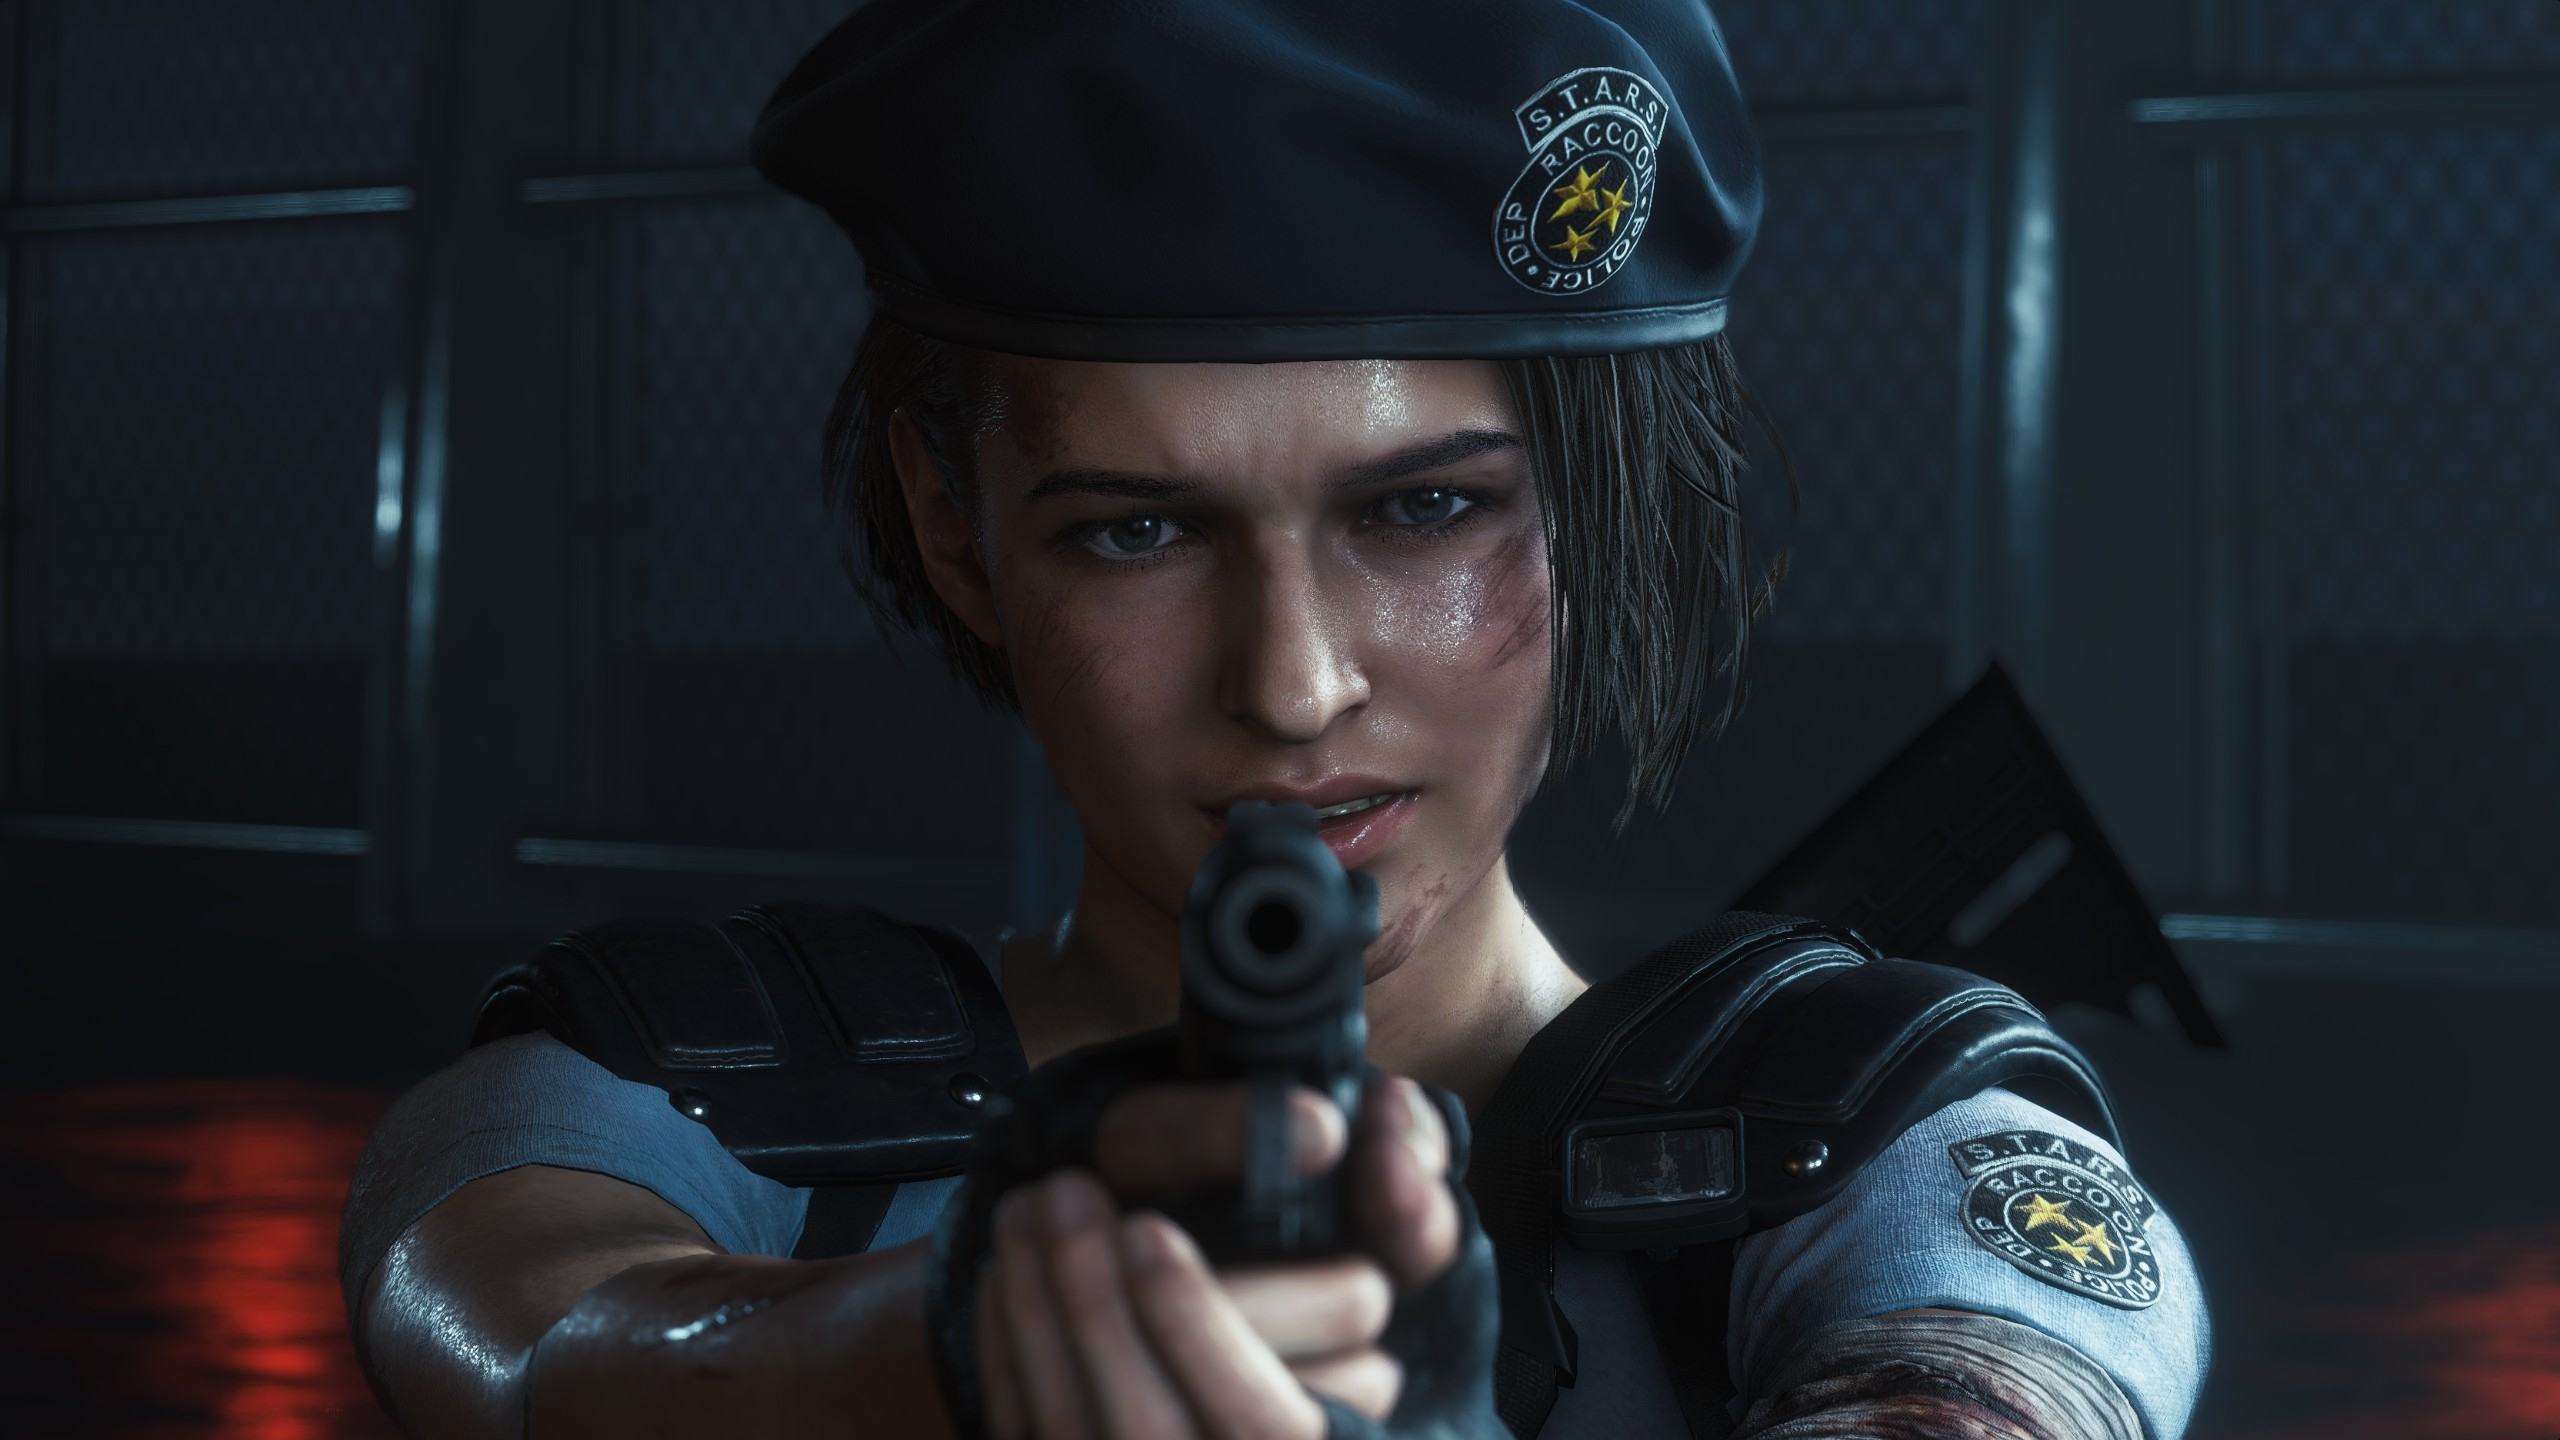 2560x1440 Wallpaper : Resident evil 3, Resident Evil, Jill Valentine, video games, PC gaming, Capcom, S T A R S NorthWind 1832355 HD Wallpapers